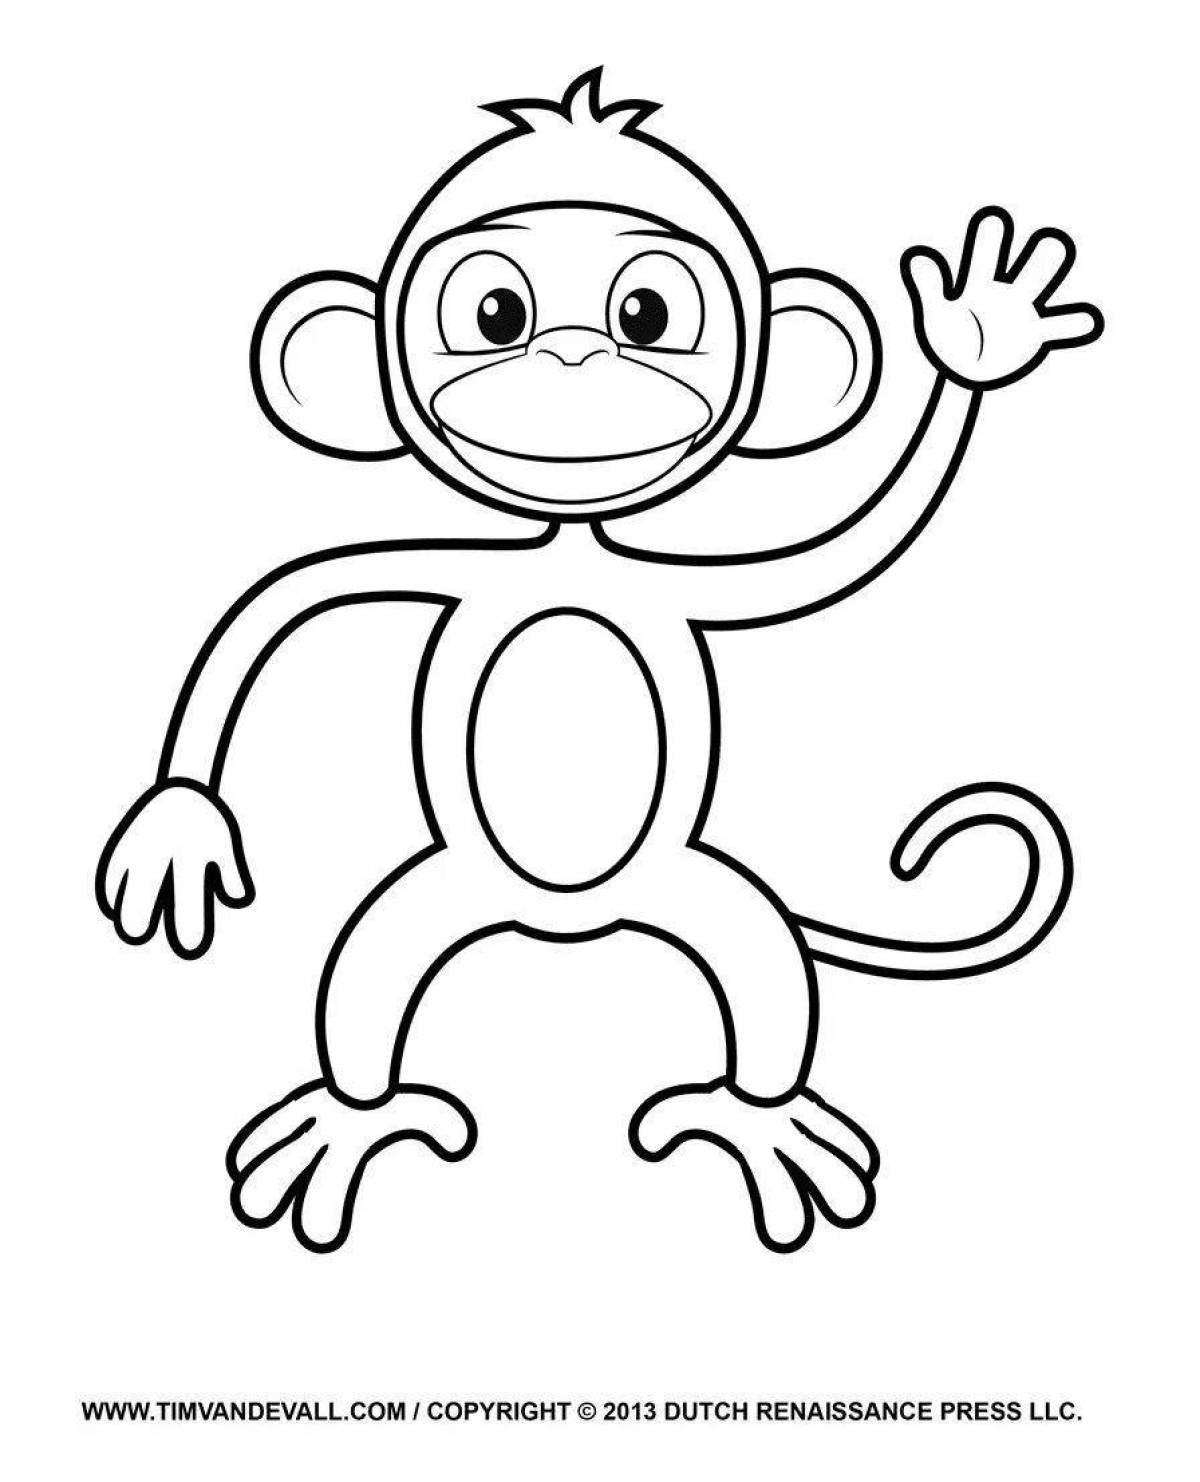 Coloring monkey for kids